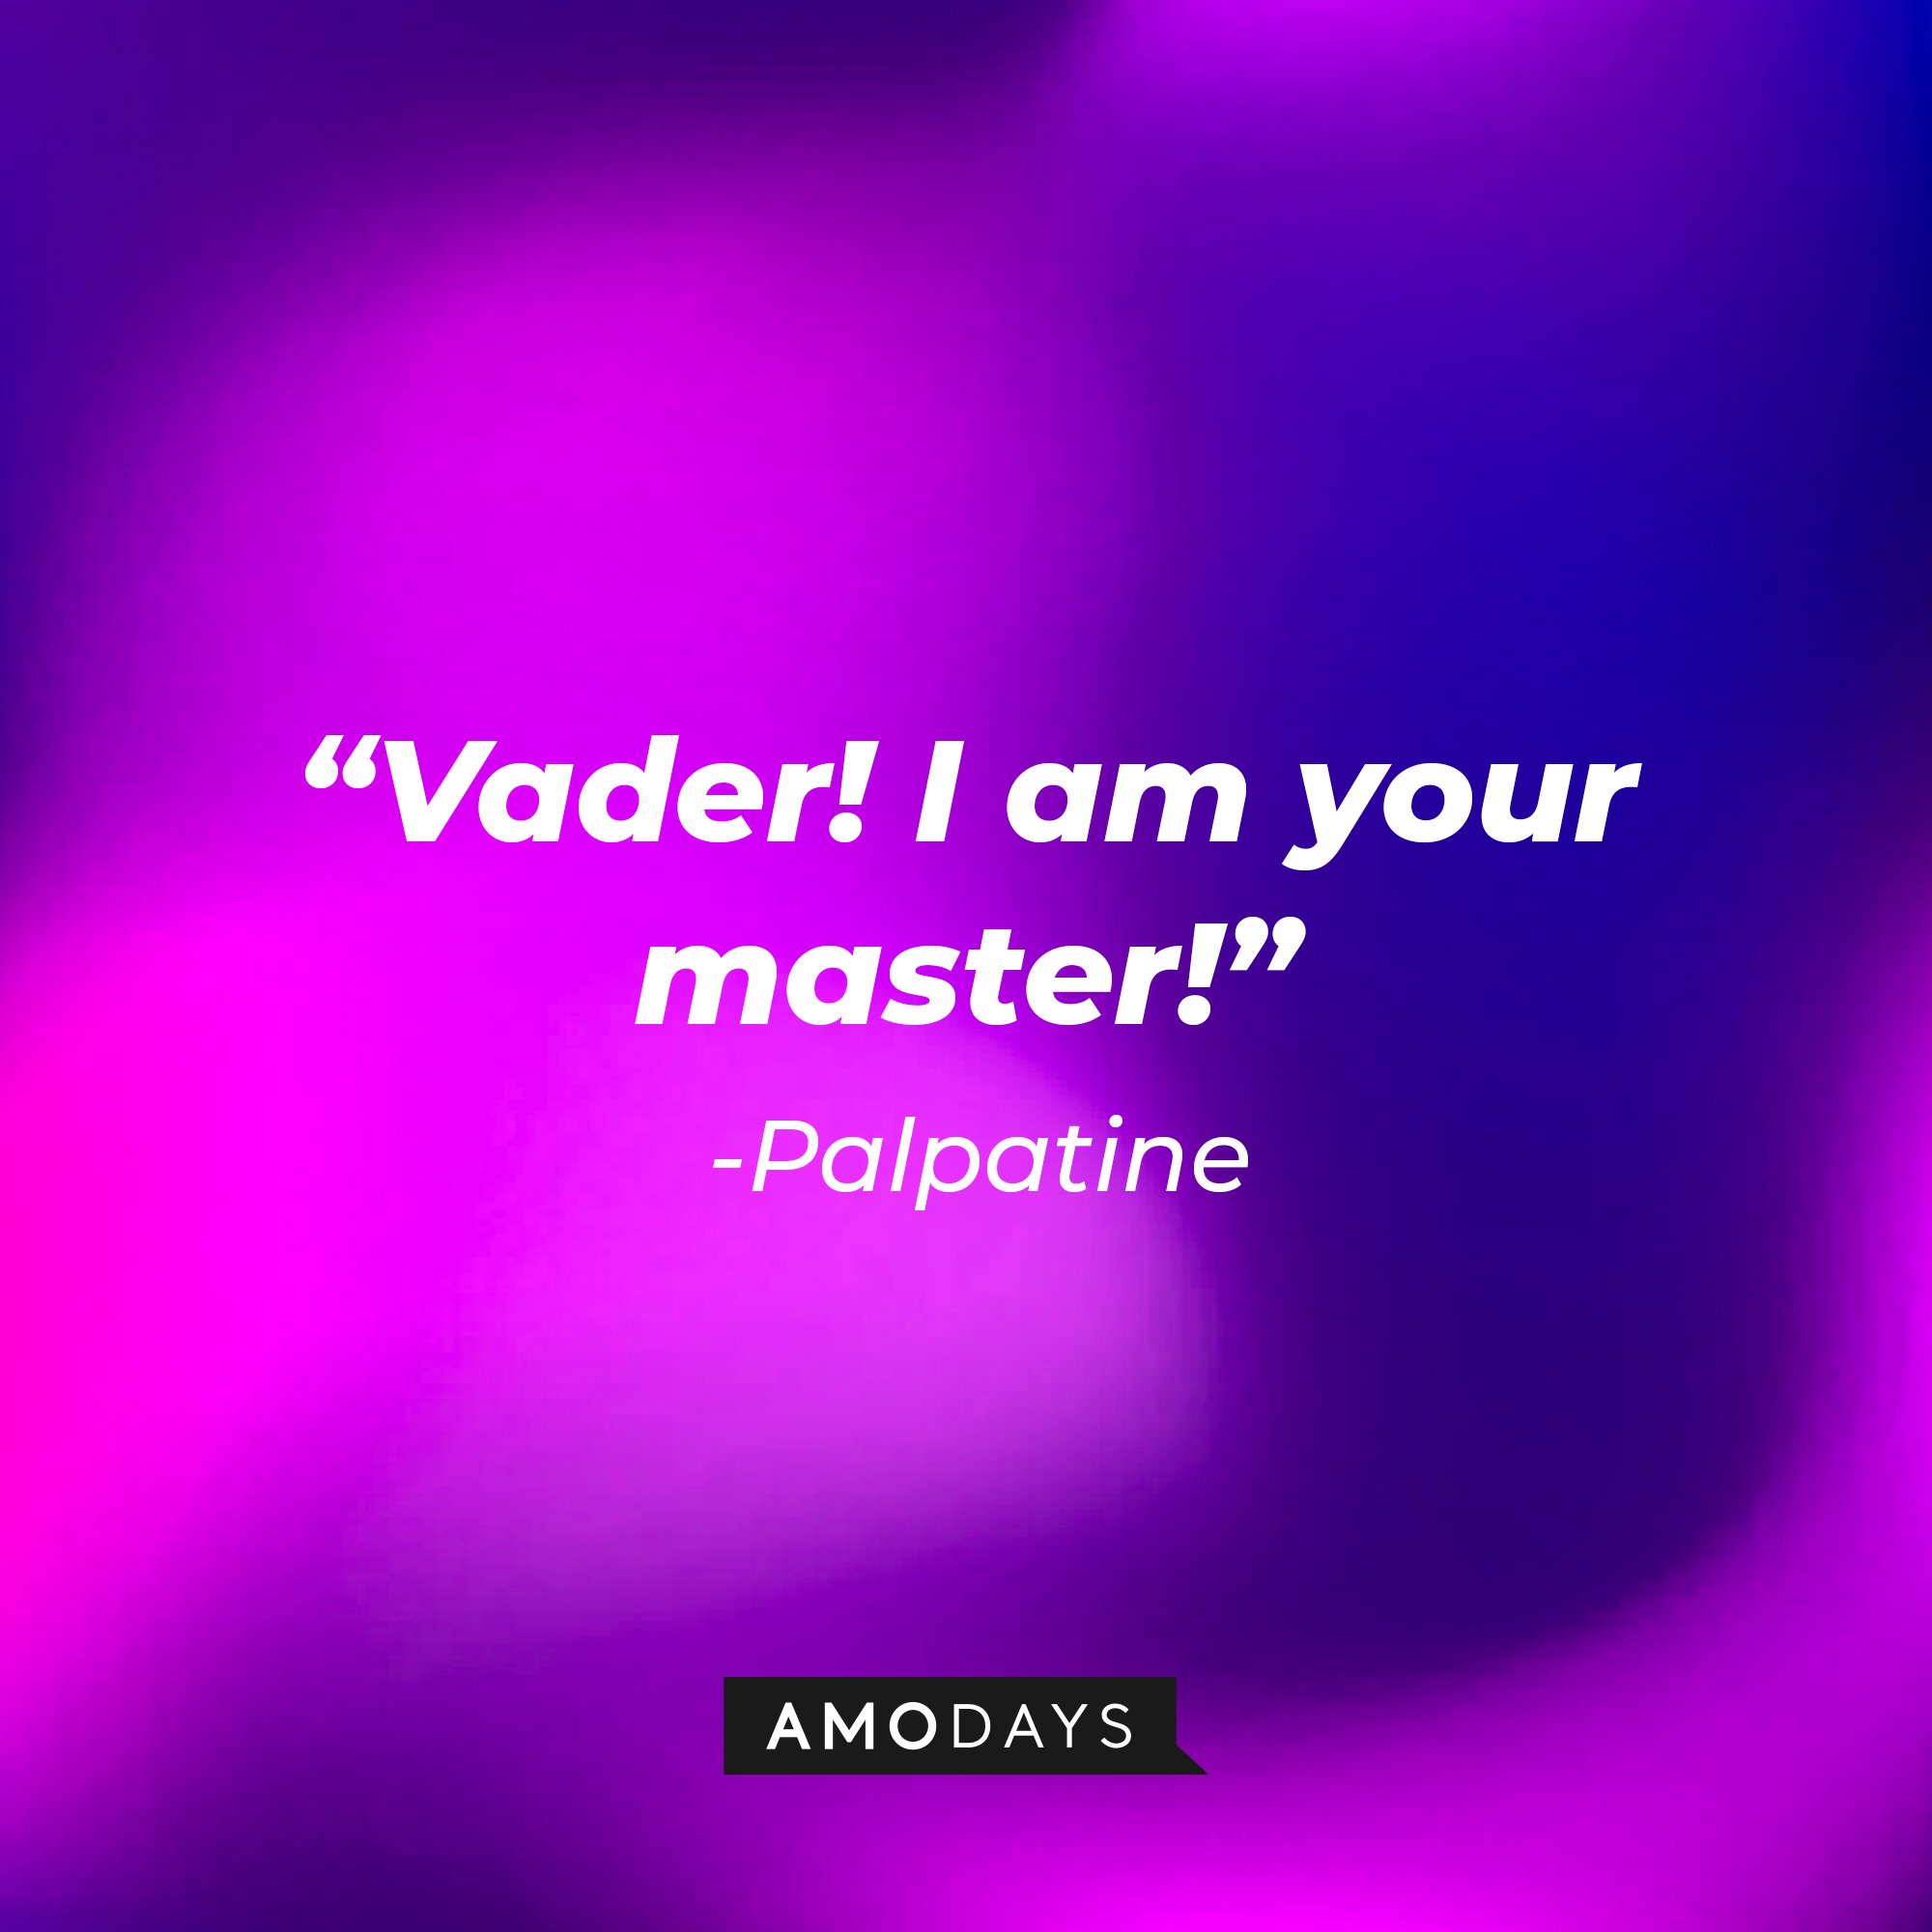 Palpatine's quote: “Vader! I am your master!” | Image: AmoDays